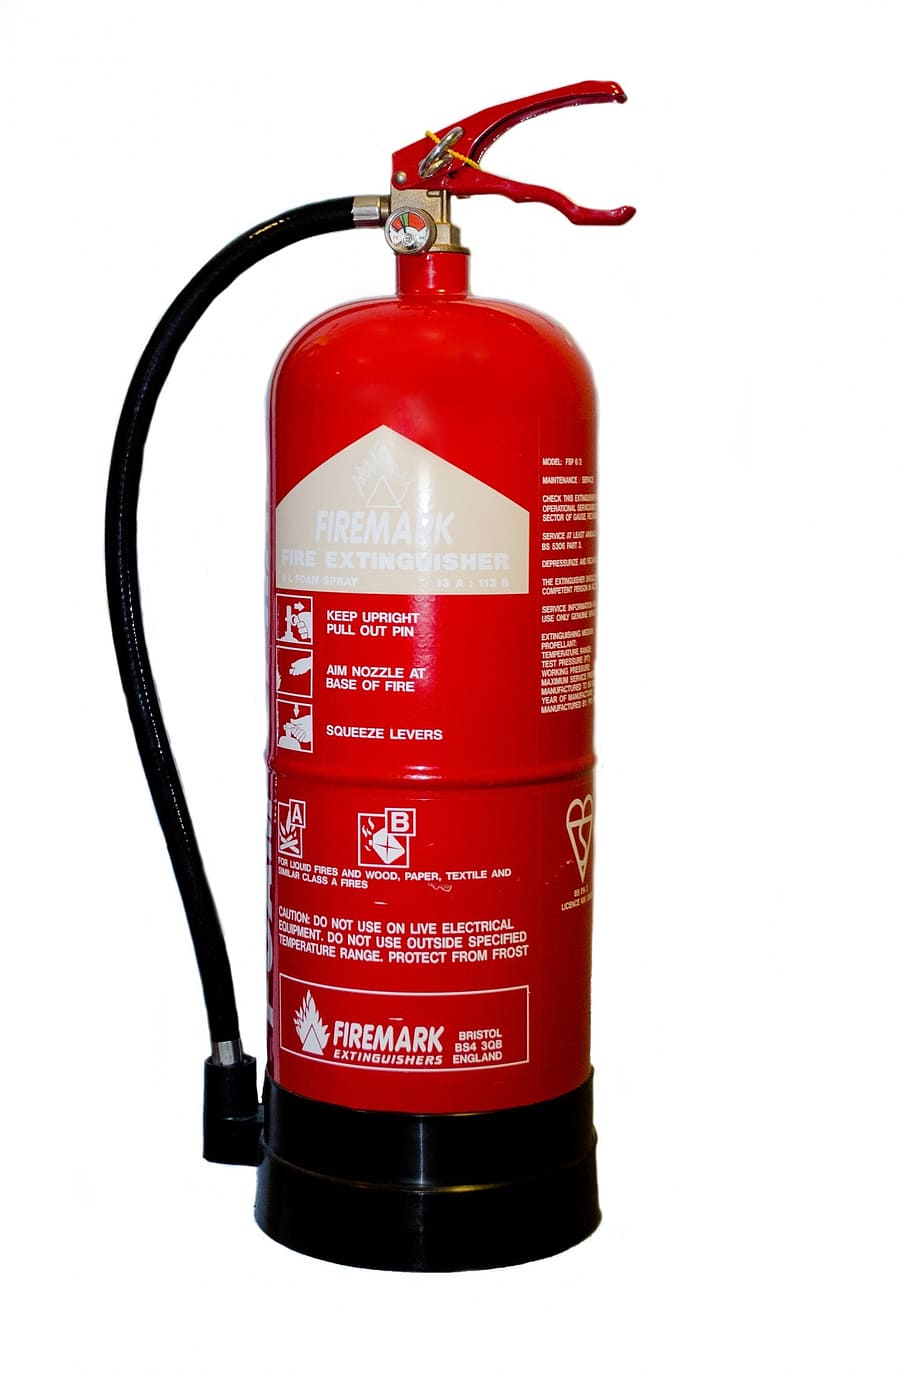 red and black Firemark fire extinguisher on white surface, alarm, HD wallpaper